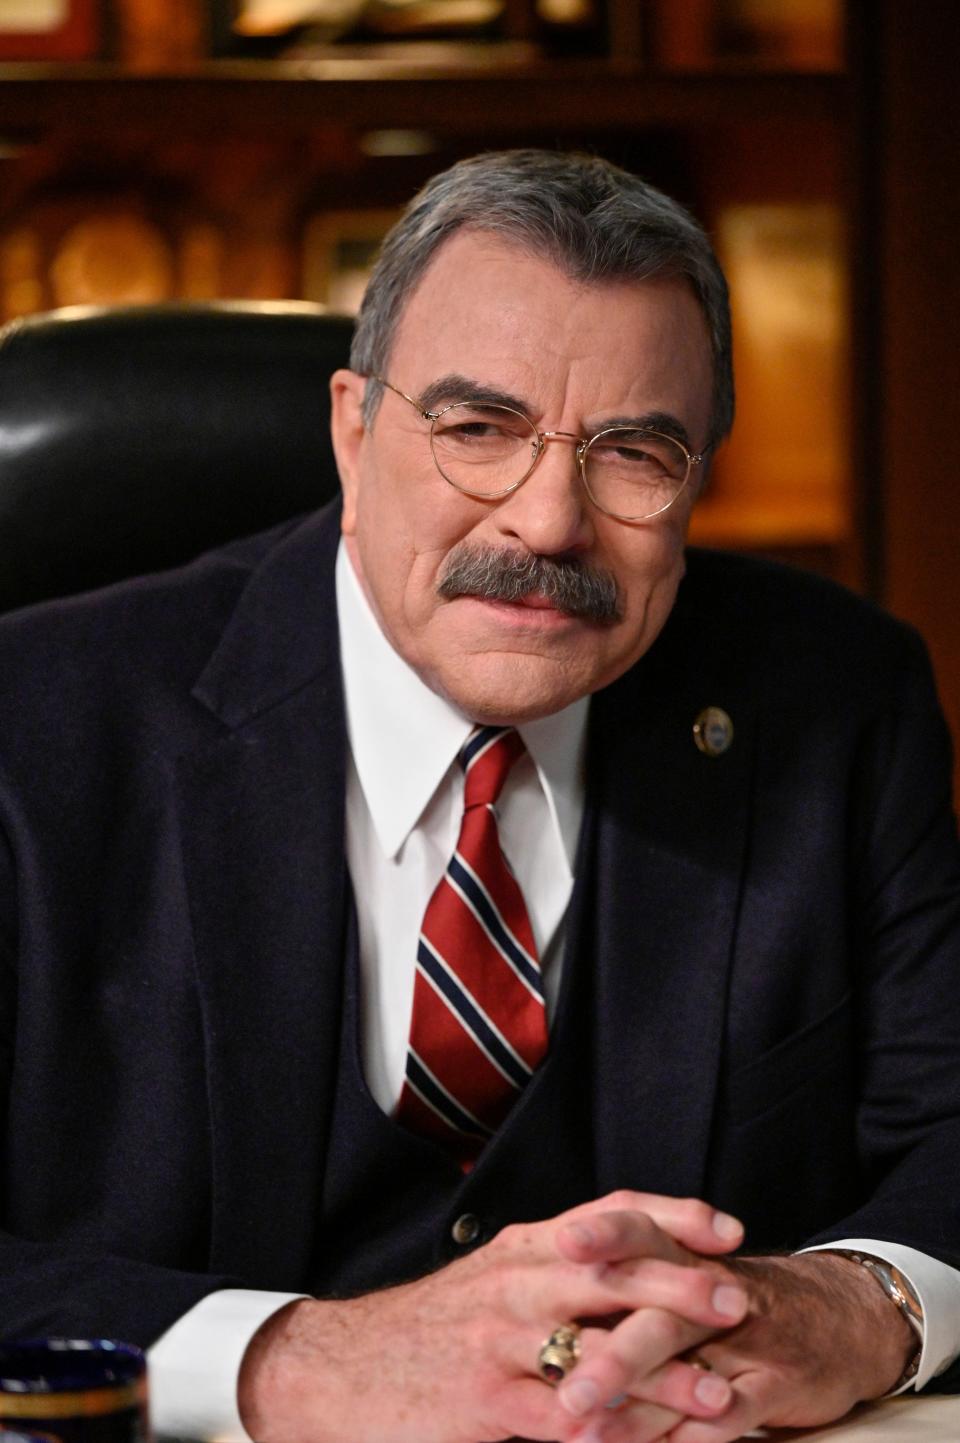 Tom Selleck is going into his 14th season, and final season, as Commissioner Frank Reagan in "Blue Bloods."